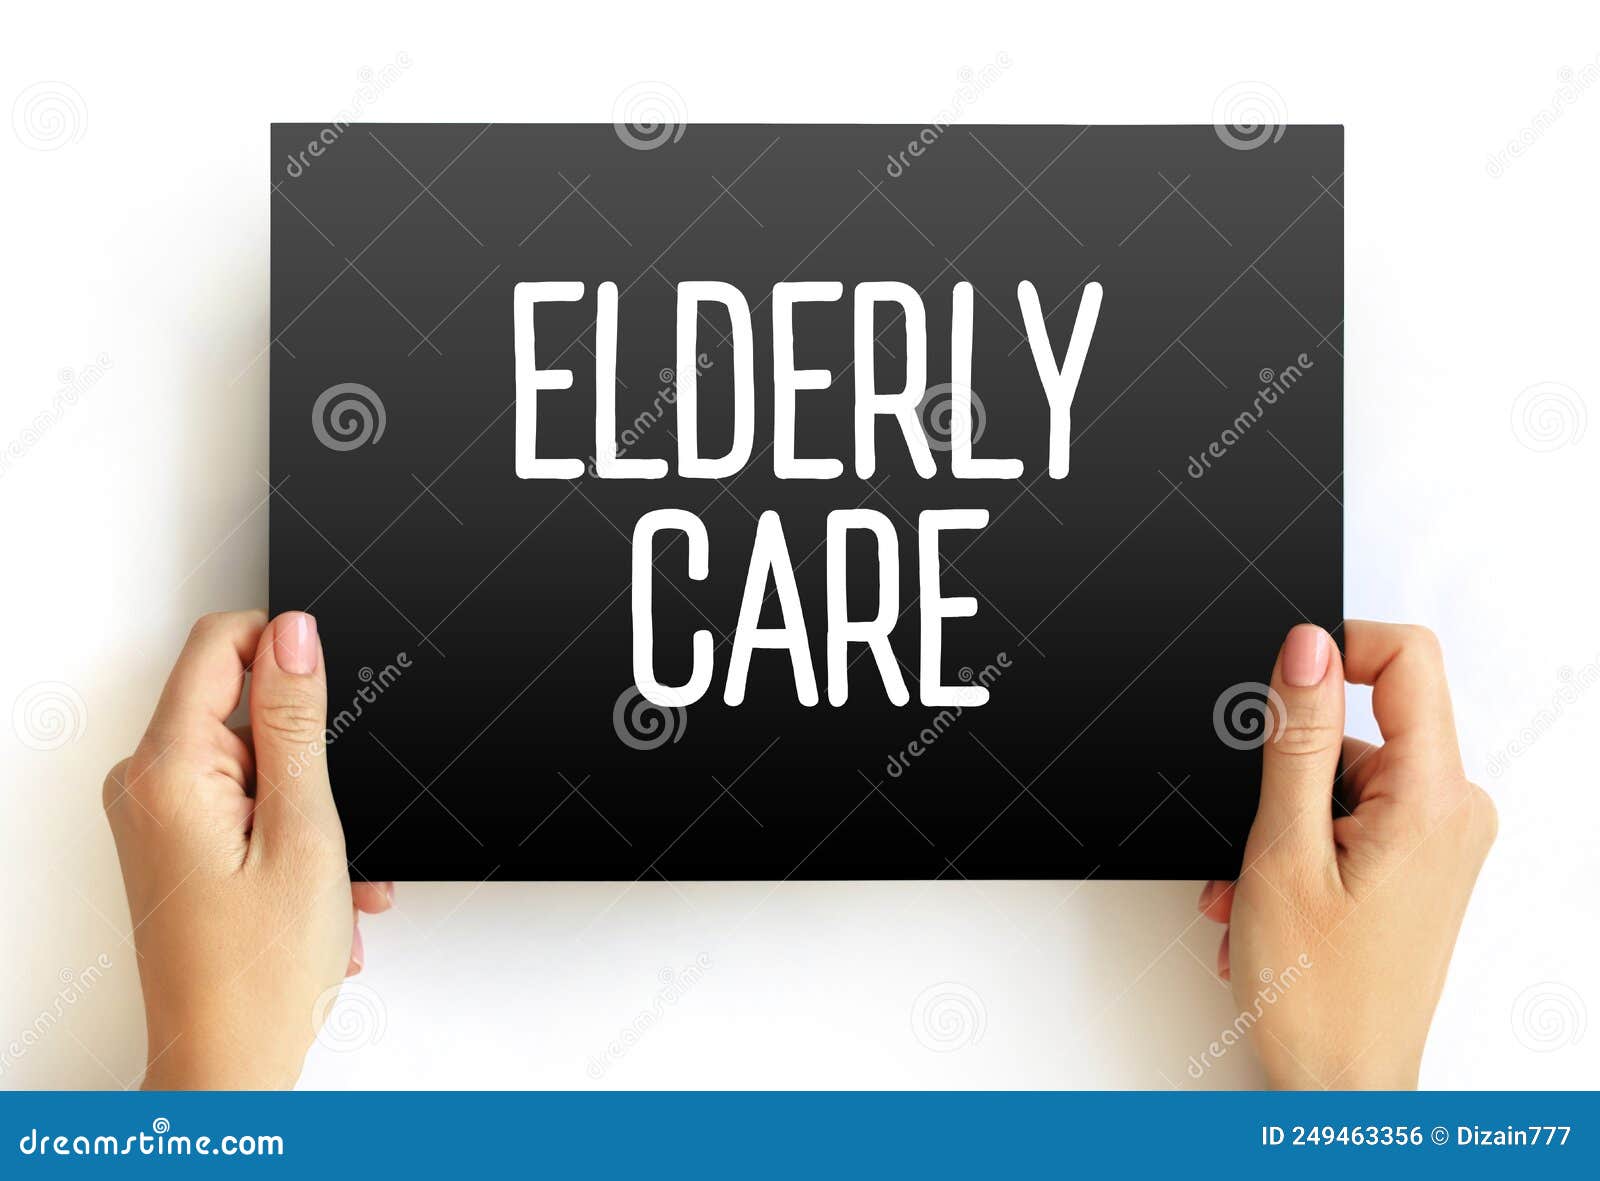 elderly care - eldercare serves the needs and requirements of senior citizens, text concept on card